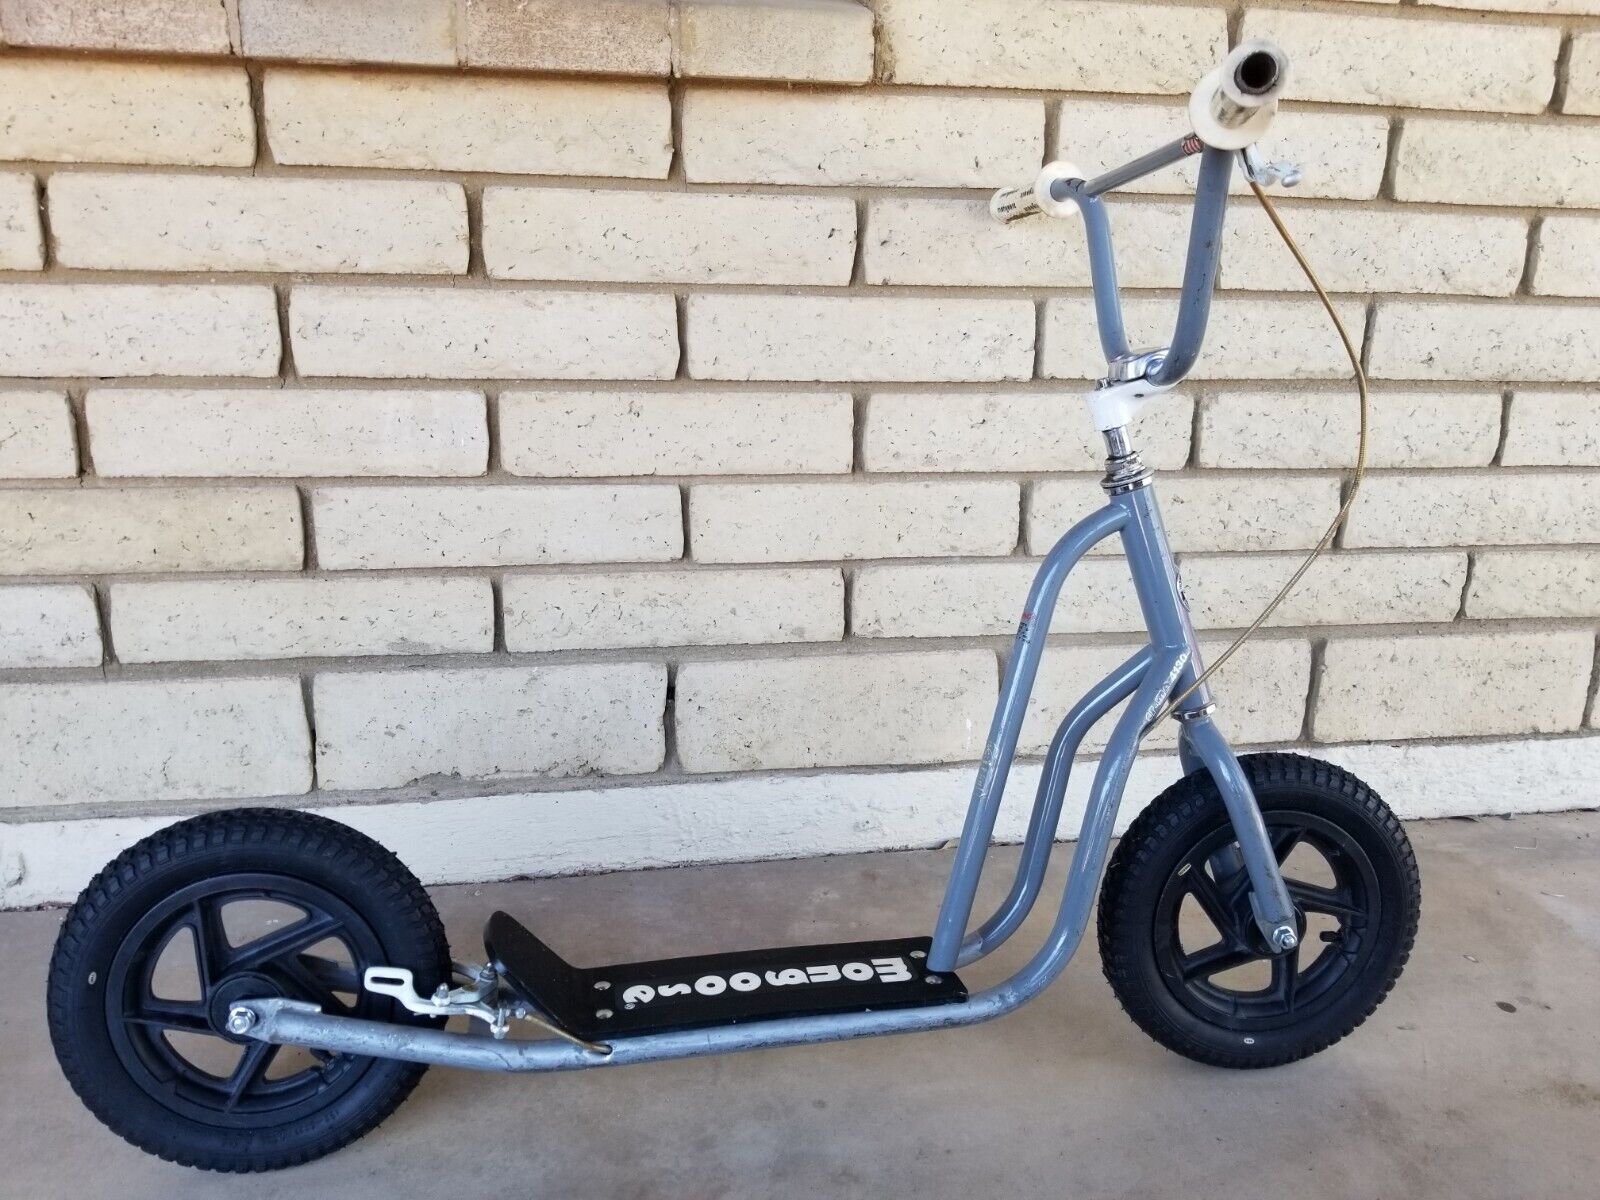 1986 Old School MONGOOSE GRAY MINISCOOT BMX SCOOTER org. Condition 